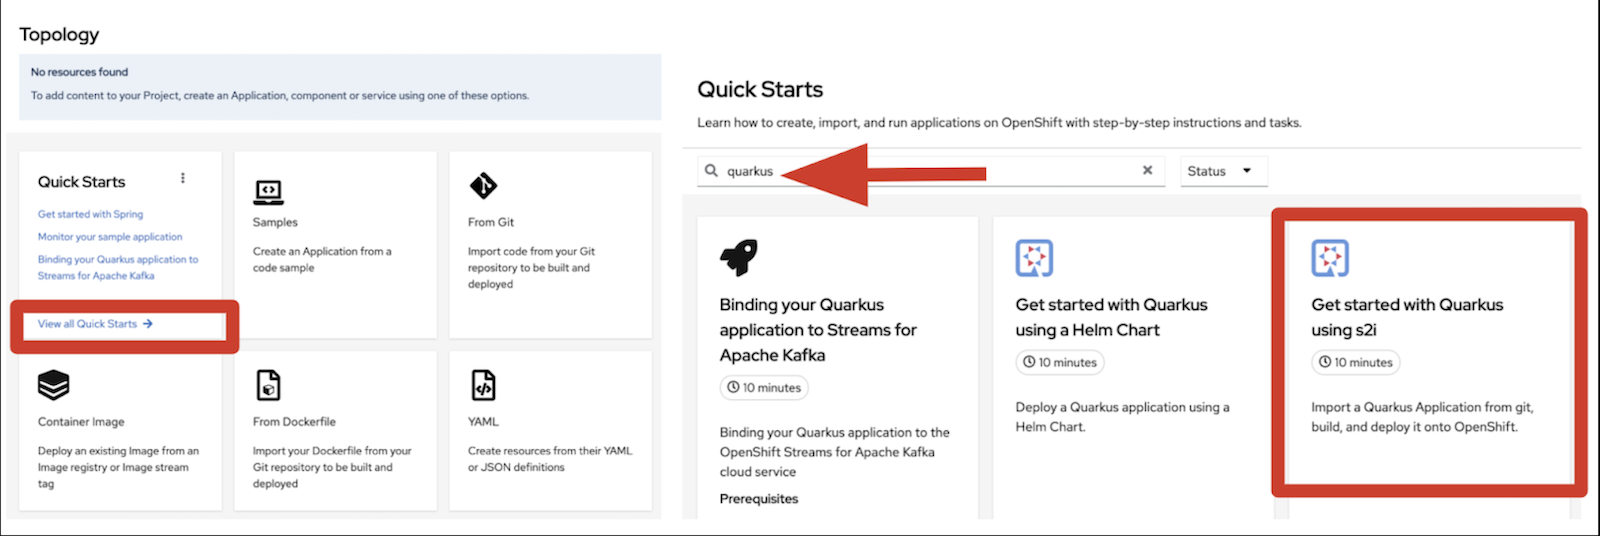 Enter a search for 'Quarkus' to view the three available Quarkus quick starts.